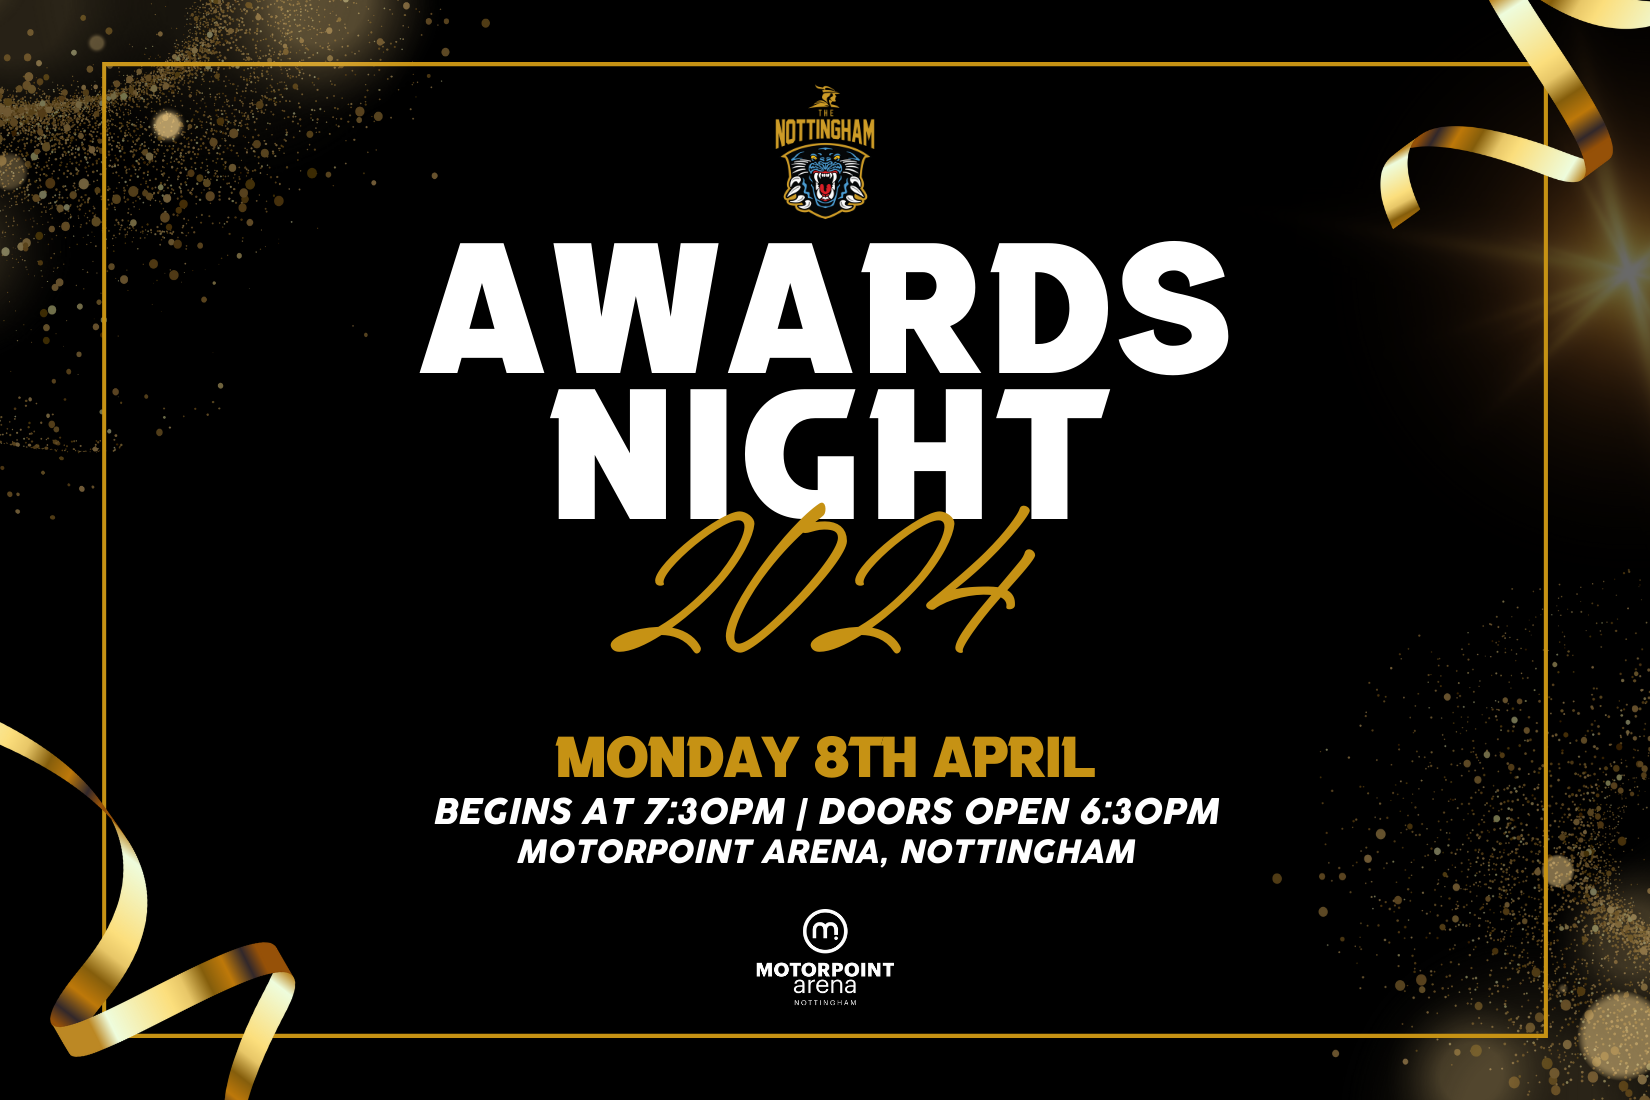 AWARDS NIGHT TO TAKE PLACE ON MONDAY 8TH APRIL Top Image